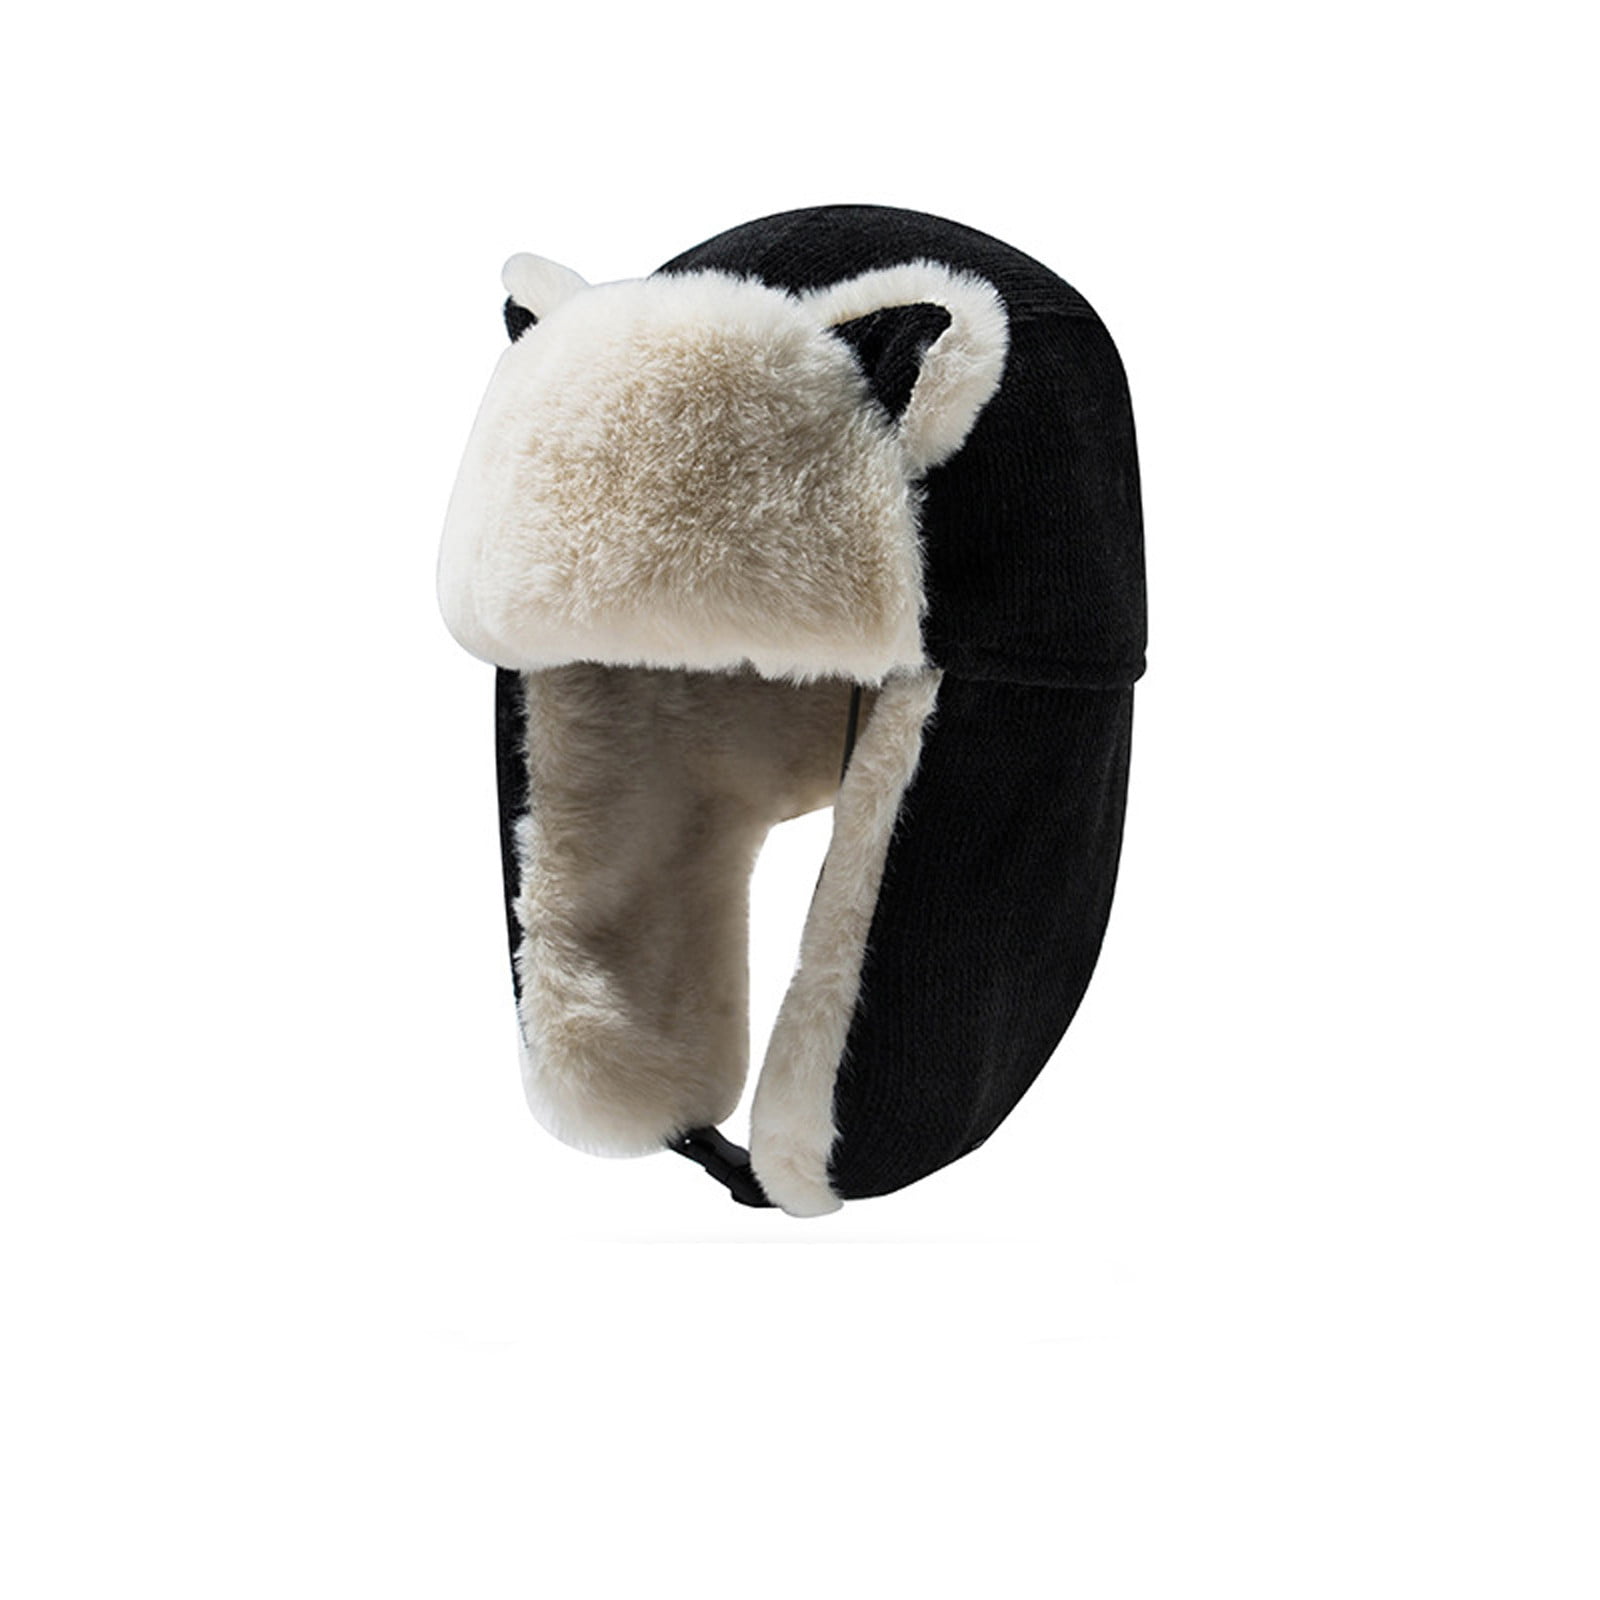 Details about   Riding hat ear warmers fleece with Sherpa fleece CHOOSE YOUR COLOR horses WINTER 